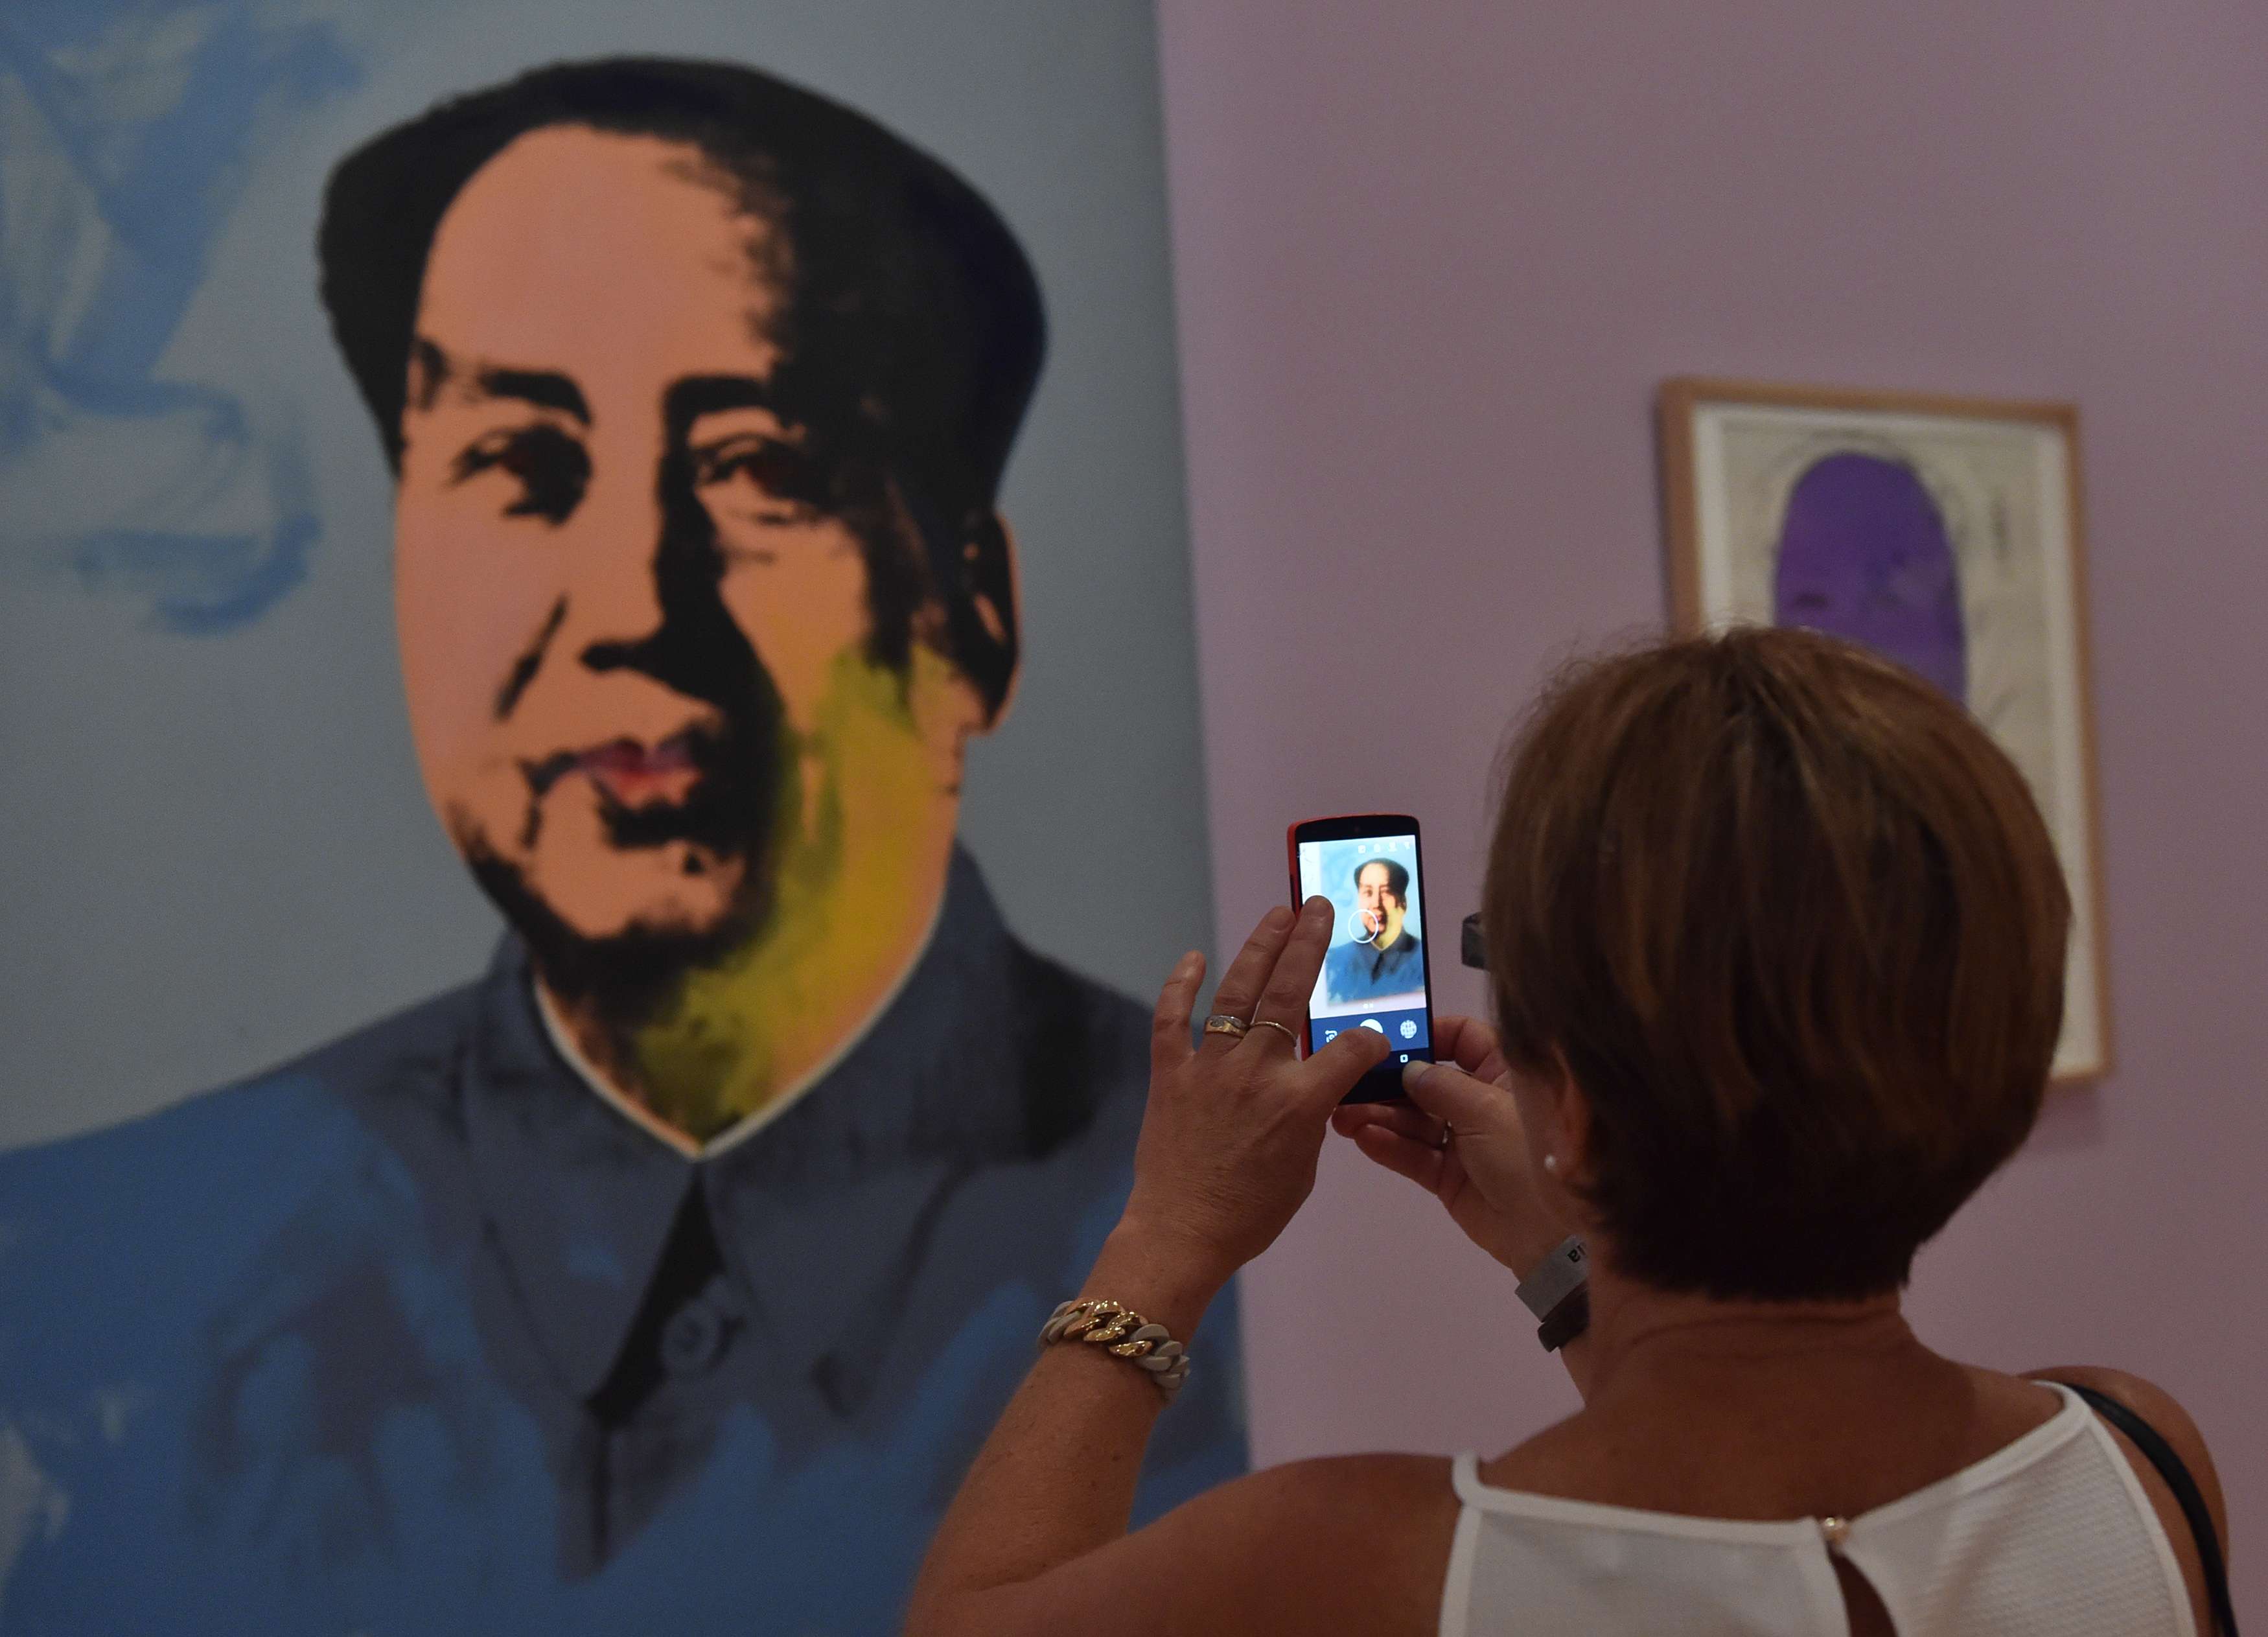 A woman in Melbourne takes a picture of a portrait of Mao Zedong by Chinese dissident artist Ai Weiwei. Photo: AFP